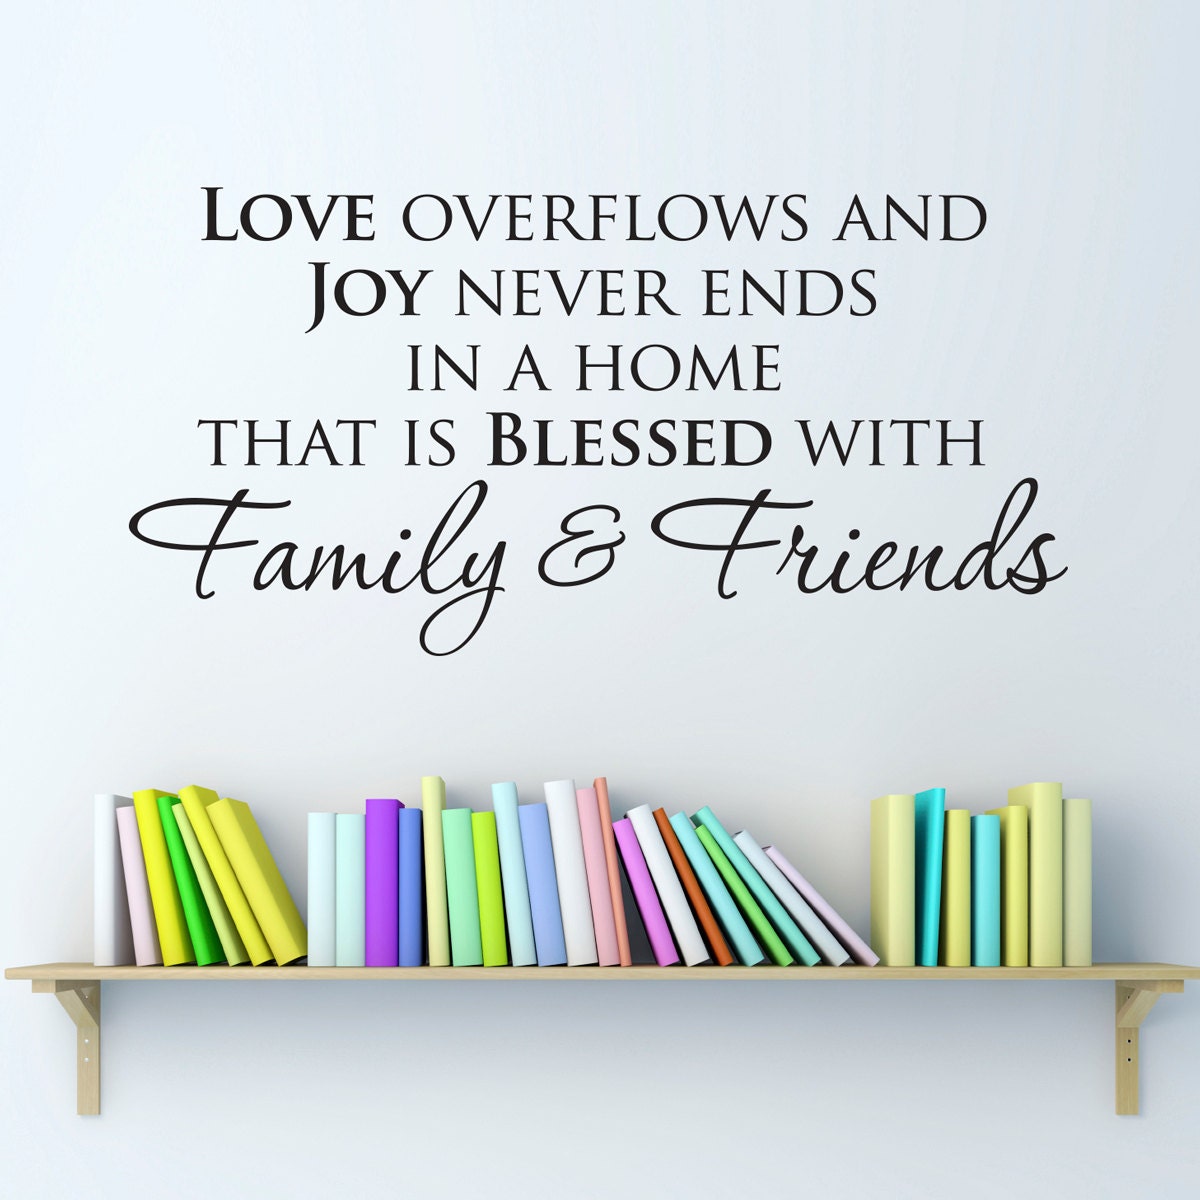 Family & Friends Wall Decal - love overflows - joy never ends - Home Wall Decal - Medium